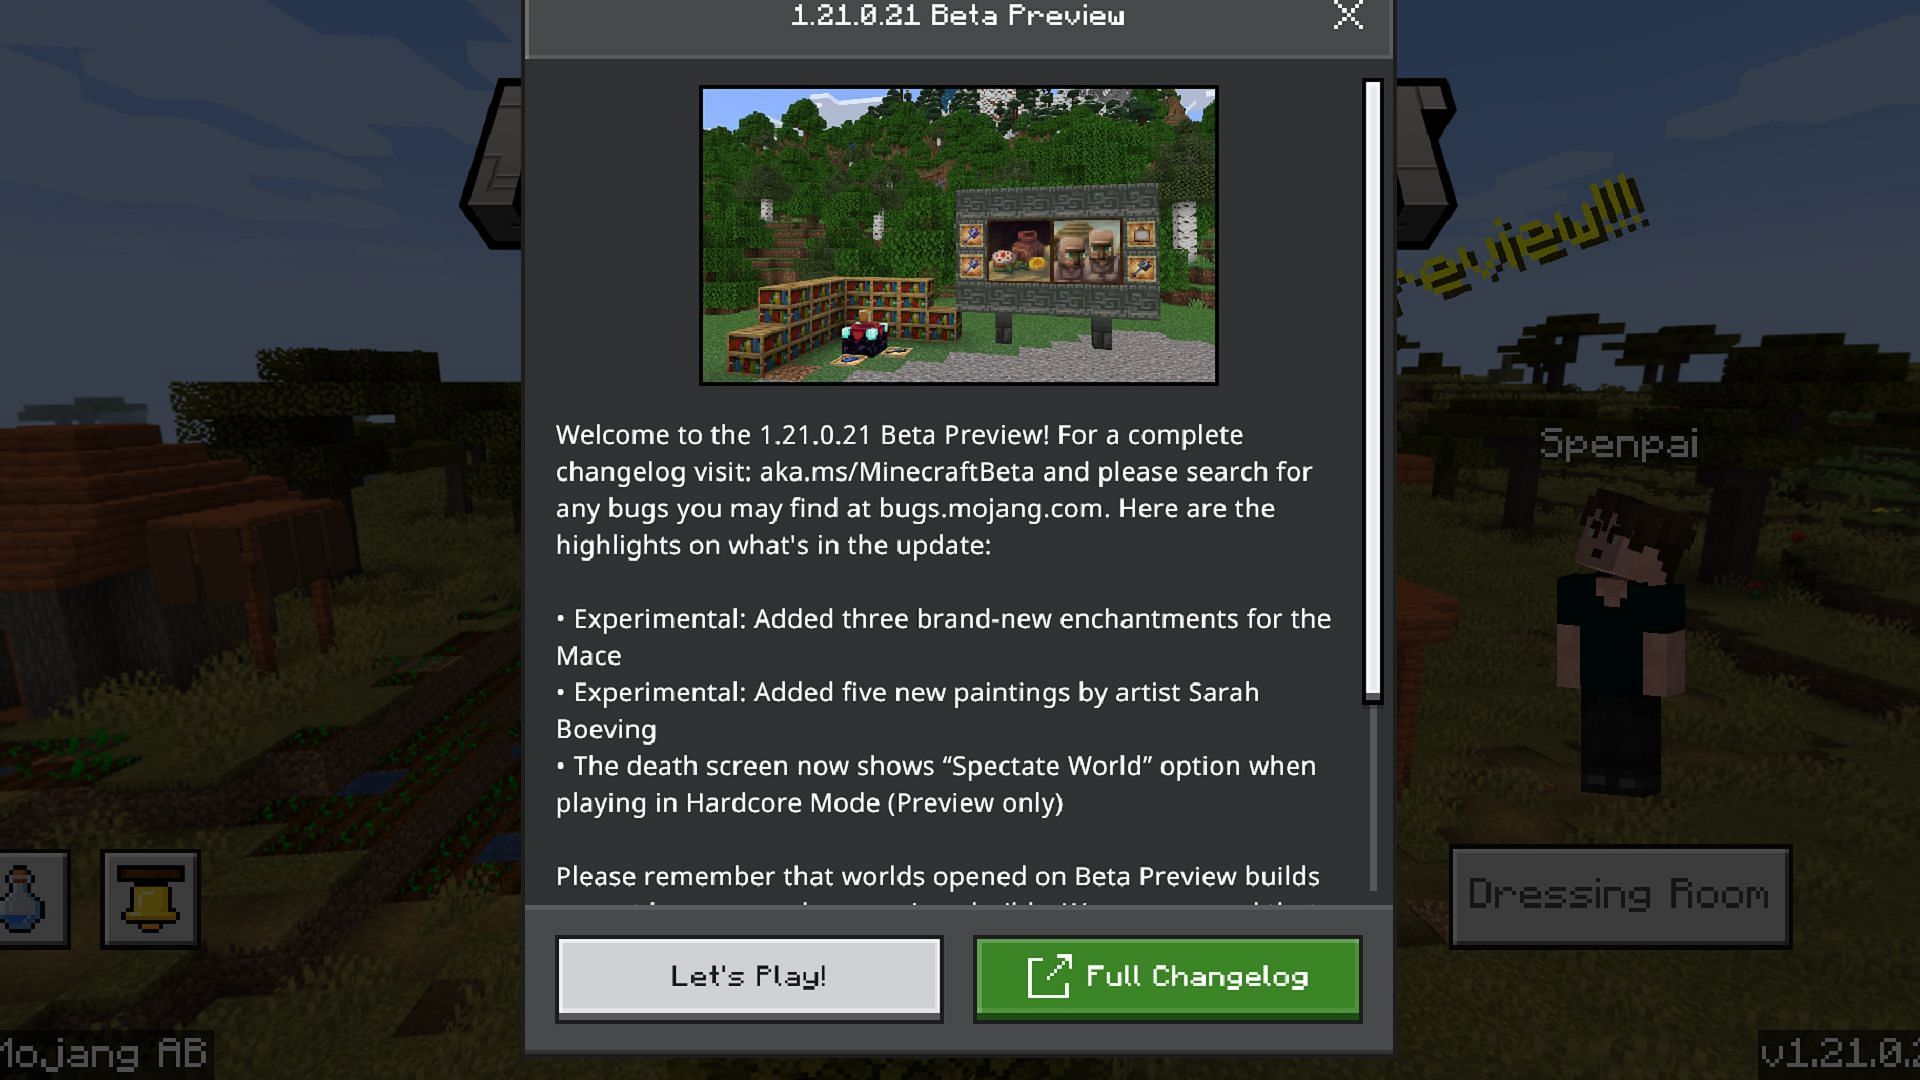 How to download Minecraft Preview 1.21.0.21